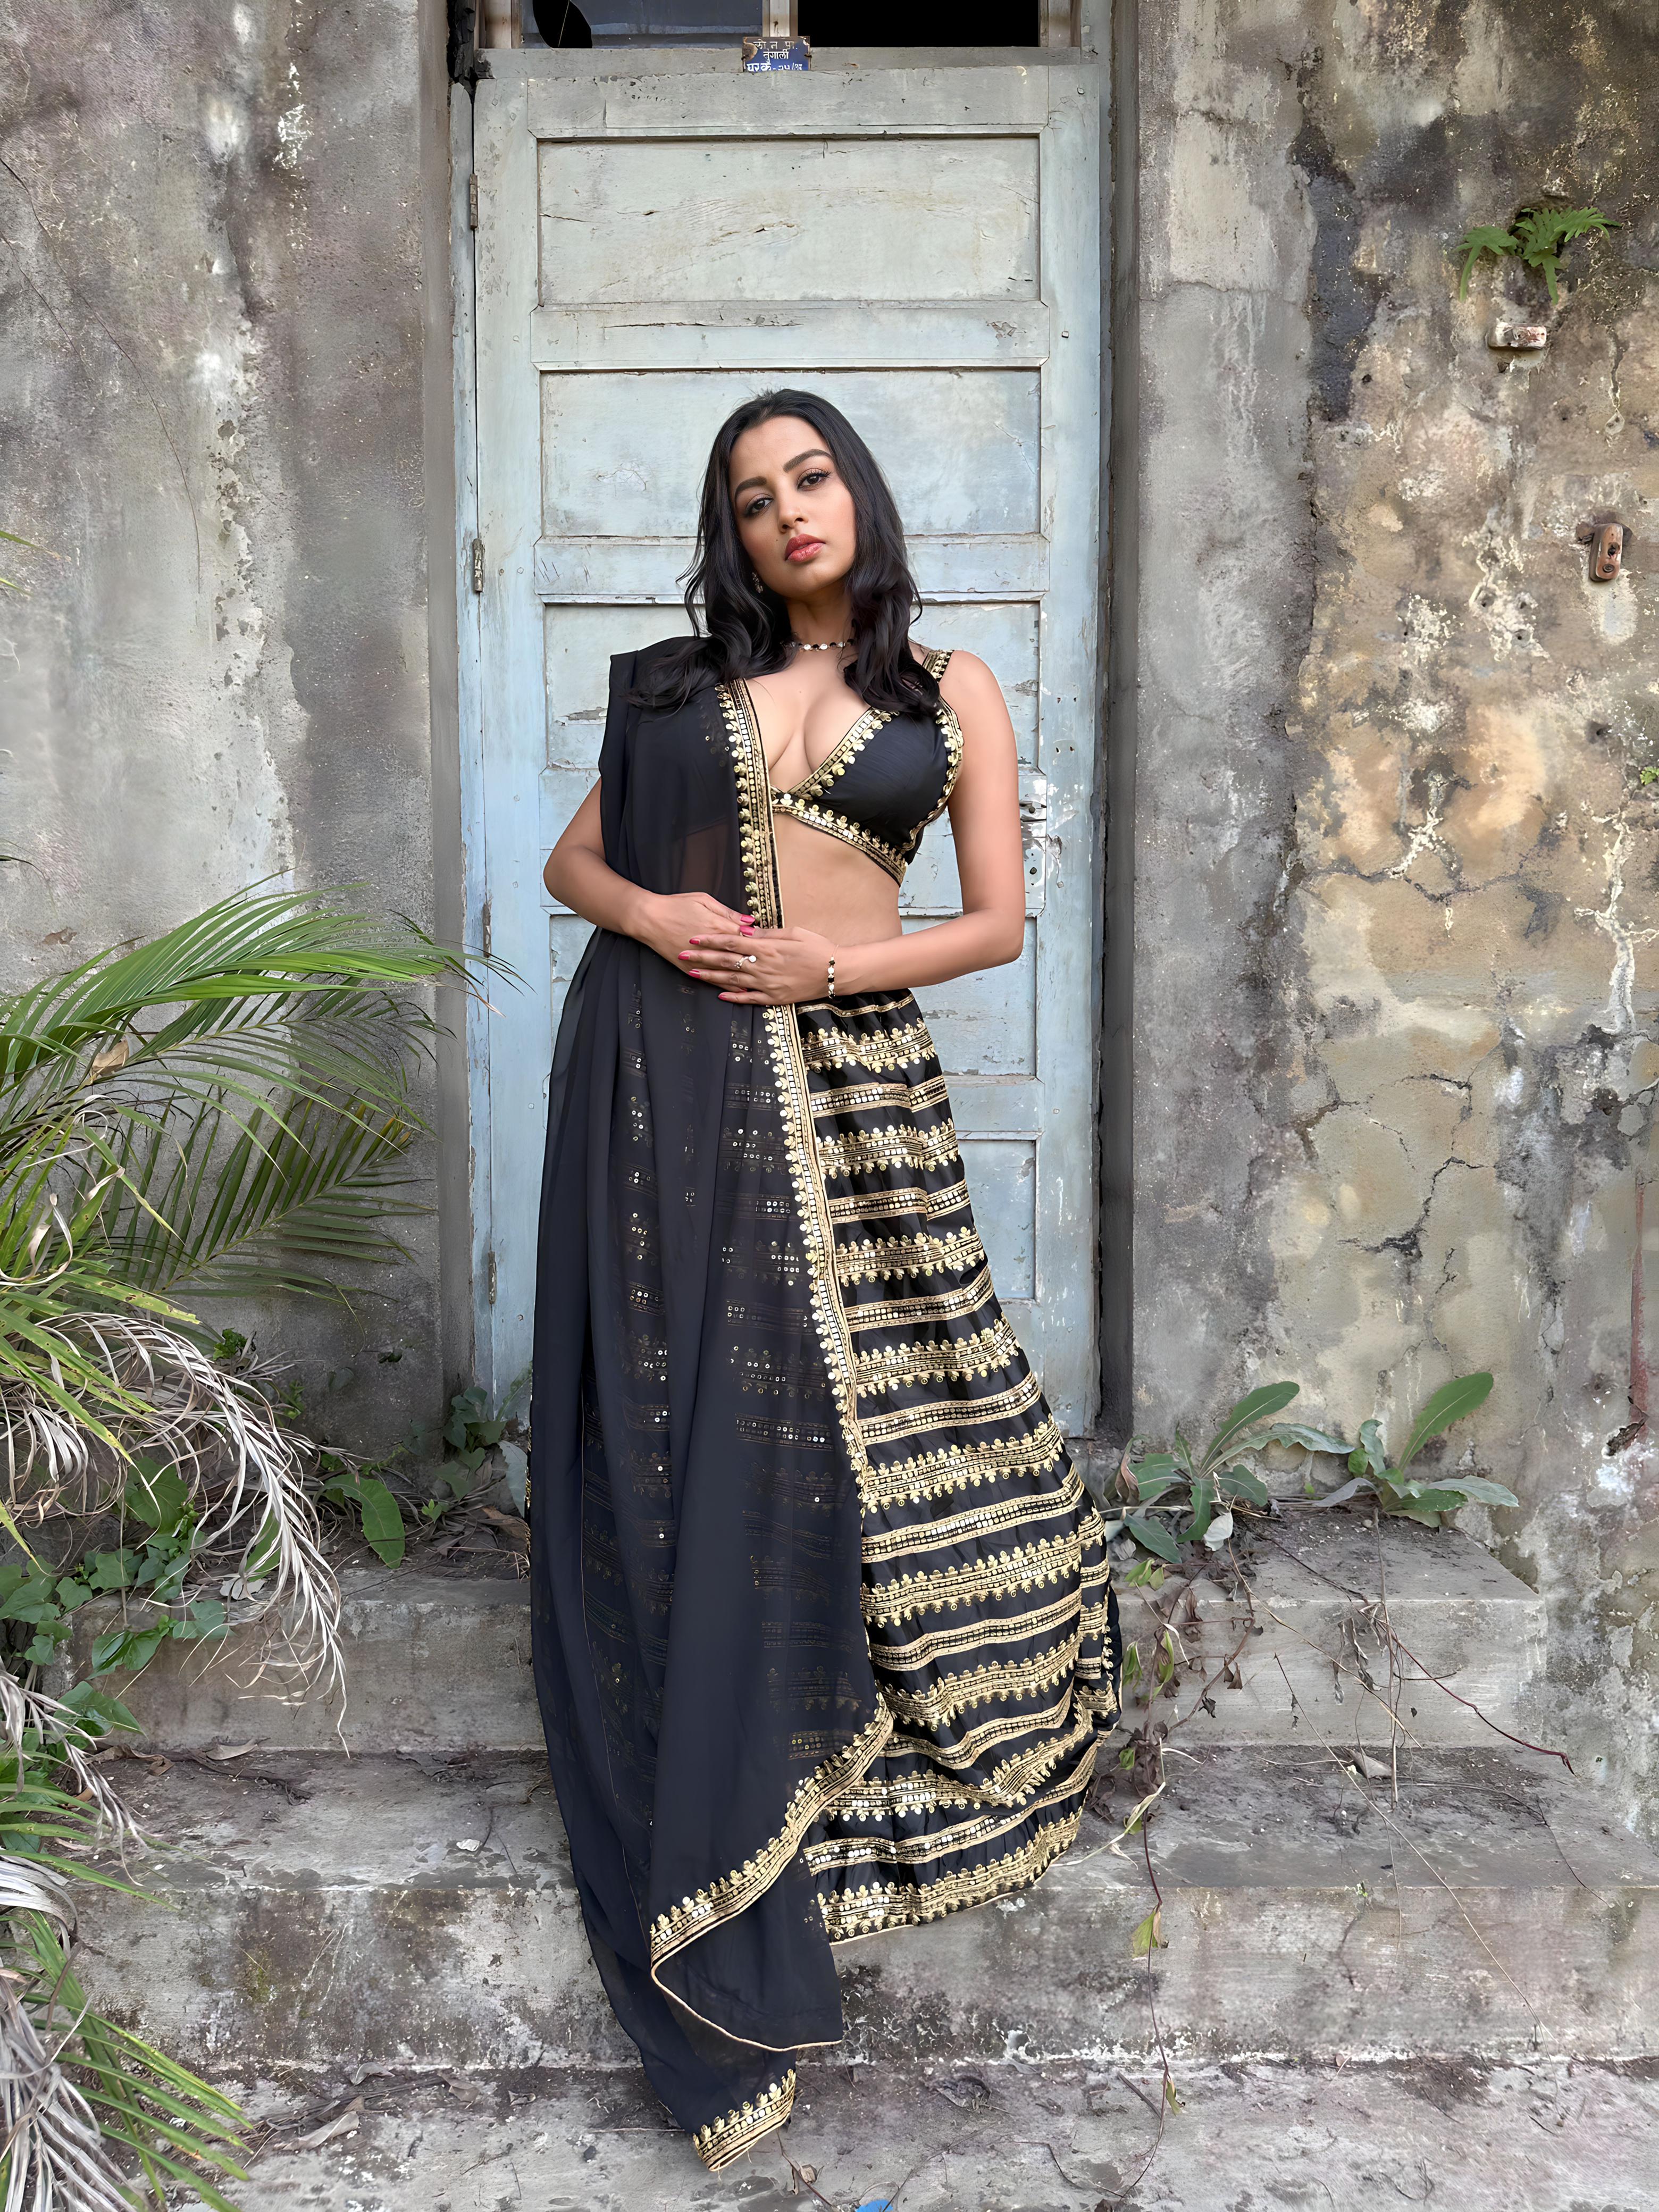 All that she lovess: Indo Western Trend Alert : Saree & Lehenga Gown (Vol 1)